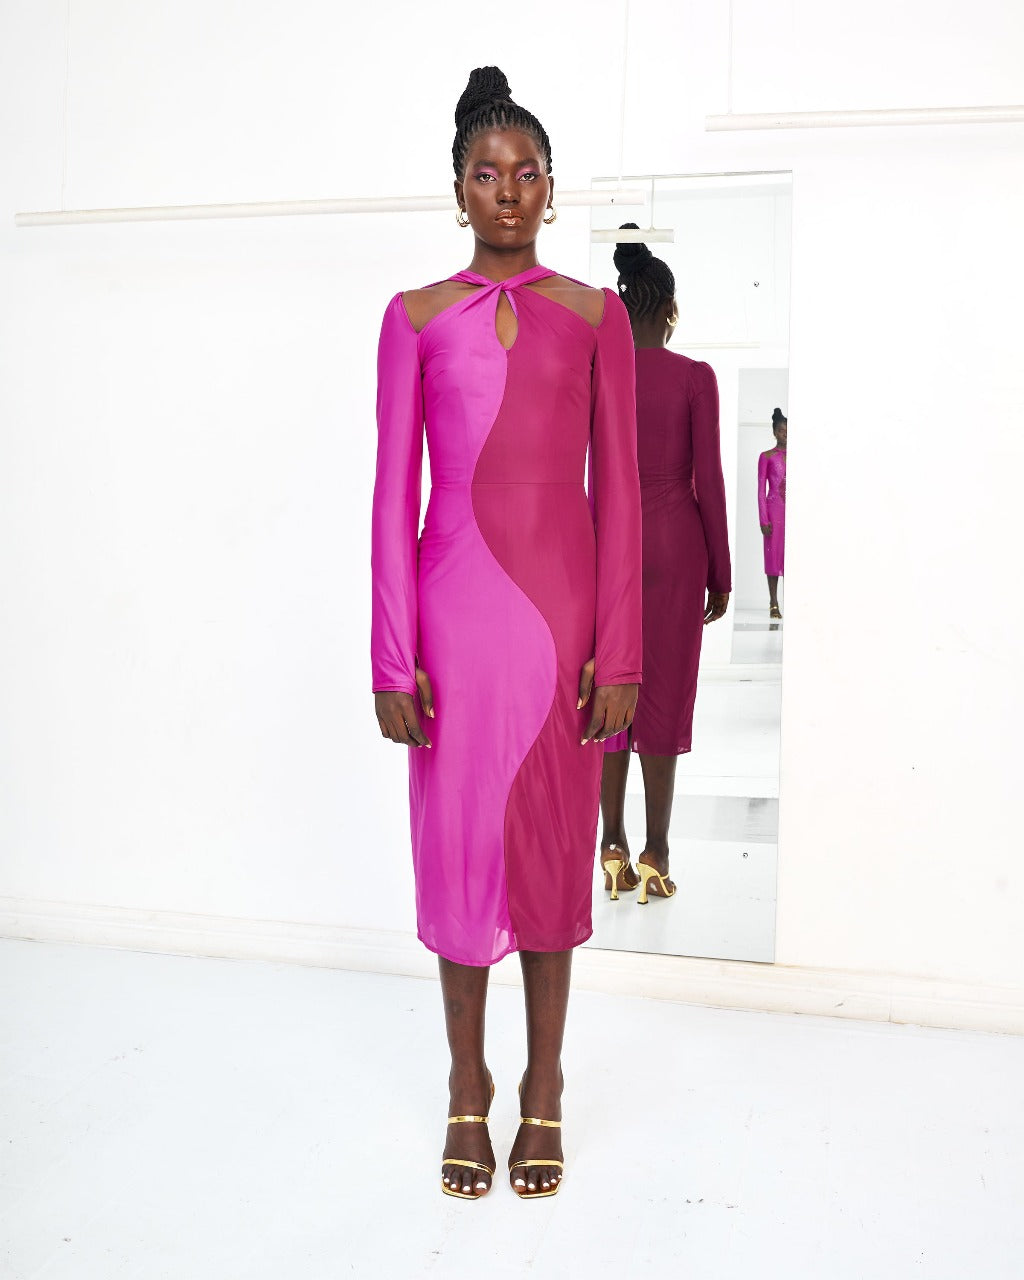 A model wearing a Fuchsia and Pink dress in a white room